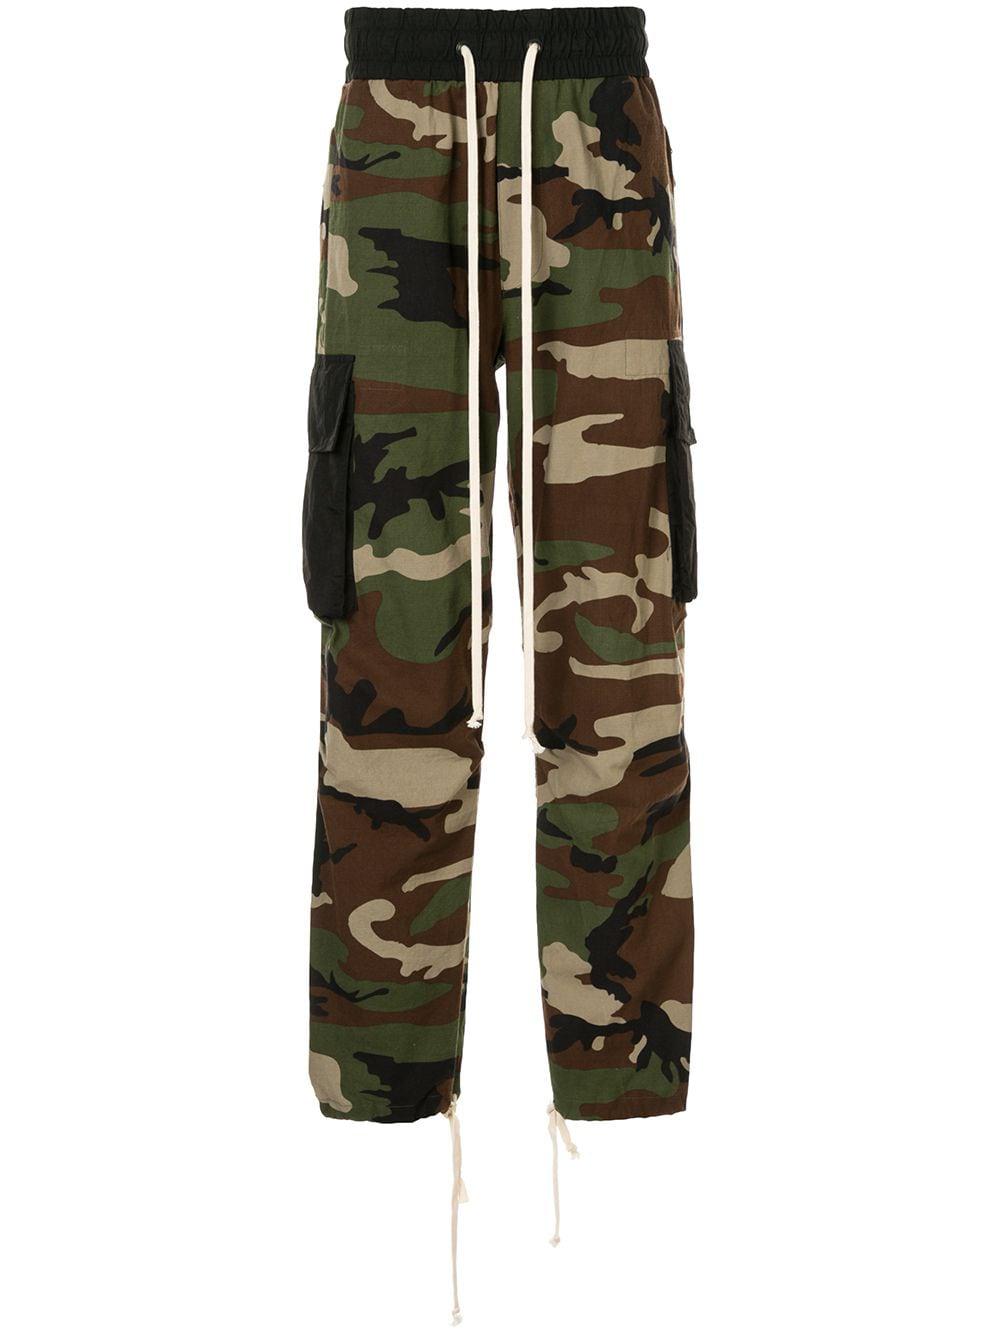 camouflage print cargo trousers by DANIEL PATRICK